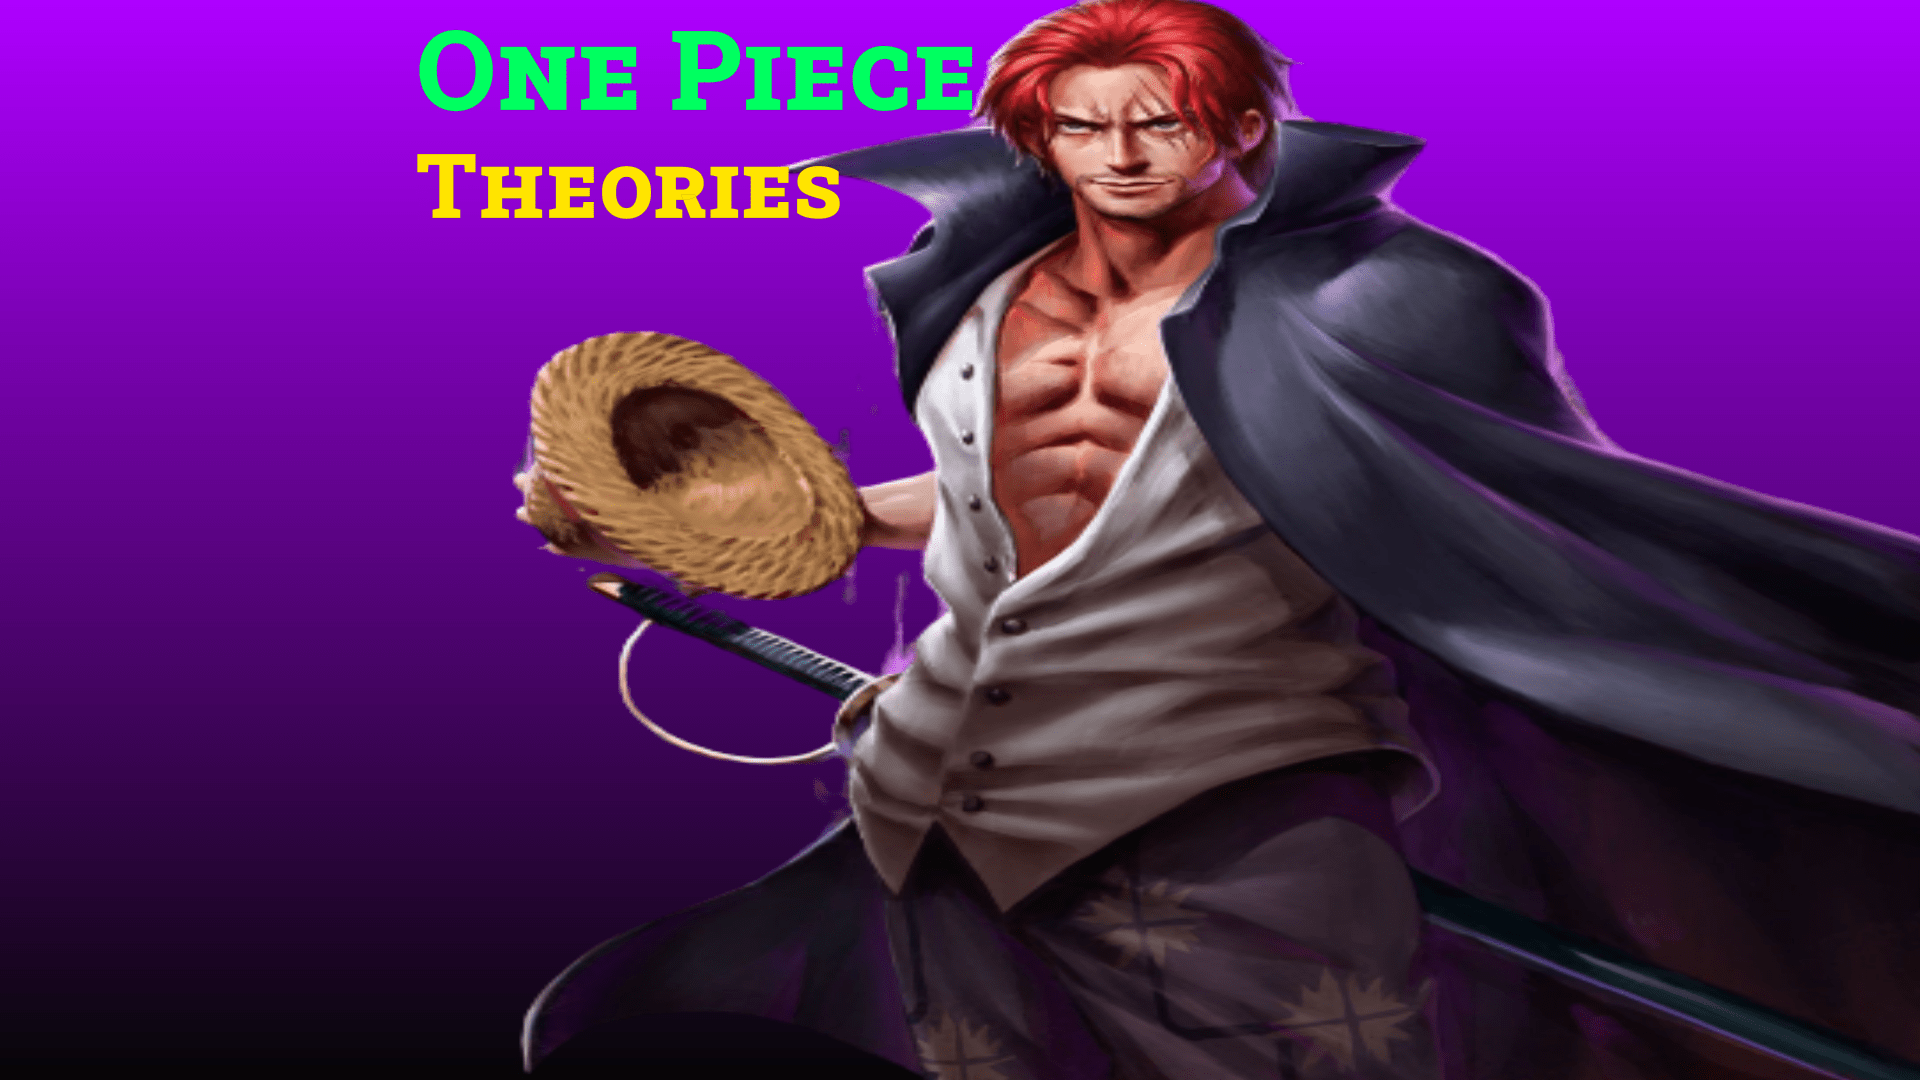 100 Crazy One Piece Theories | Interesting One Piece Theory